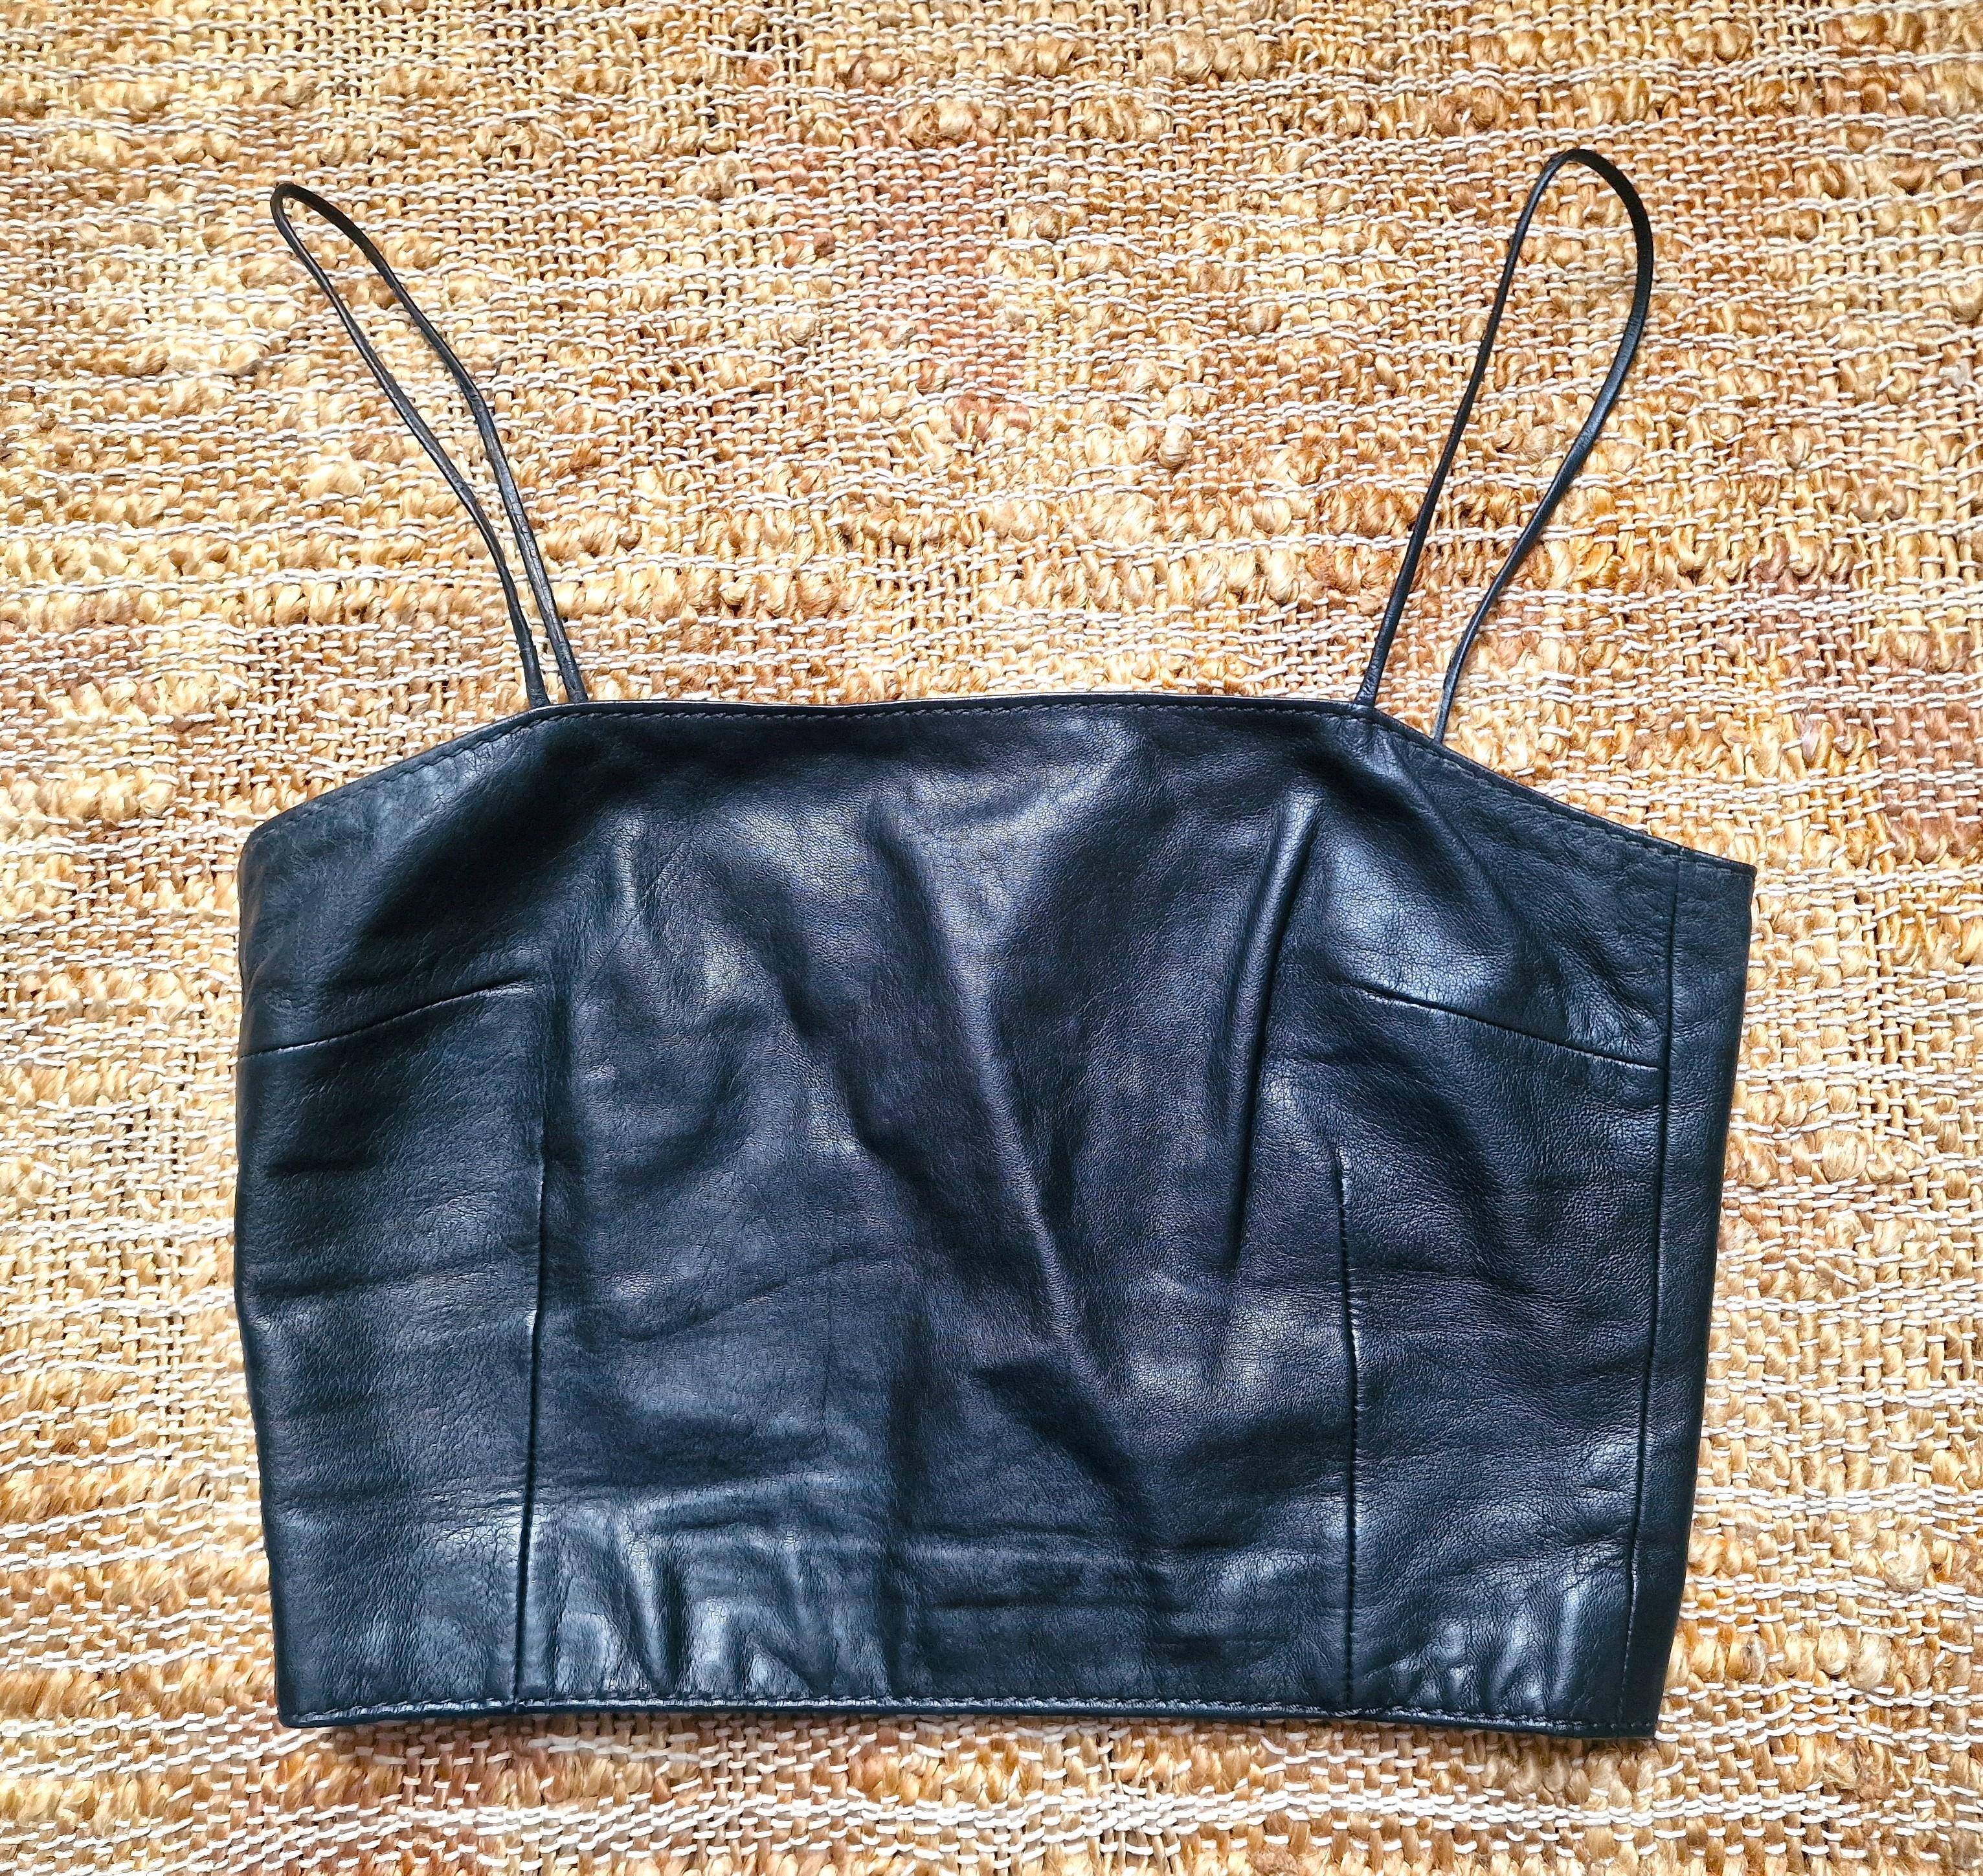 Istante crop leather bustier by Gianni Versace!
From the 90s!
100% leather!

VERY GOOD condition!

SIZE
Small.
Makred size: IT40.
Length with straps: 39 cm / 15.3 inch
Bust: 39 cm / 15.3 inch
Waist: 33 cm / 13 inch

Made in Italy!